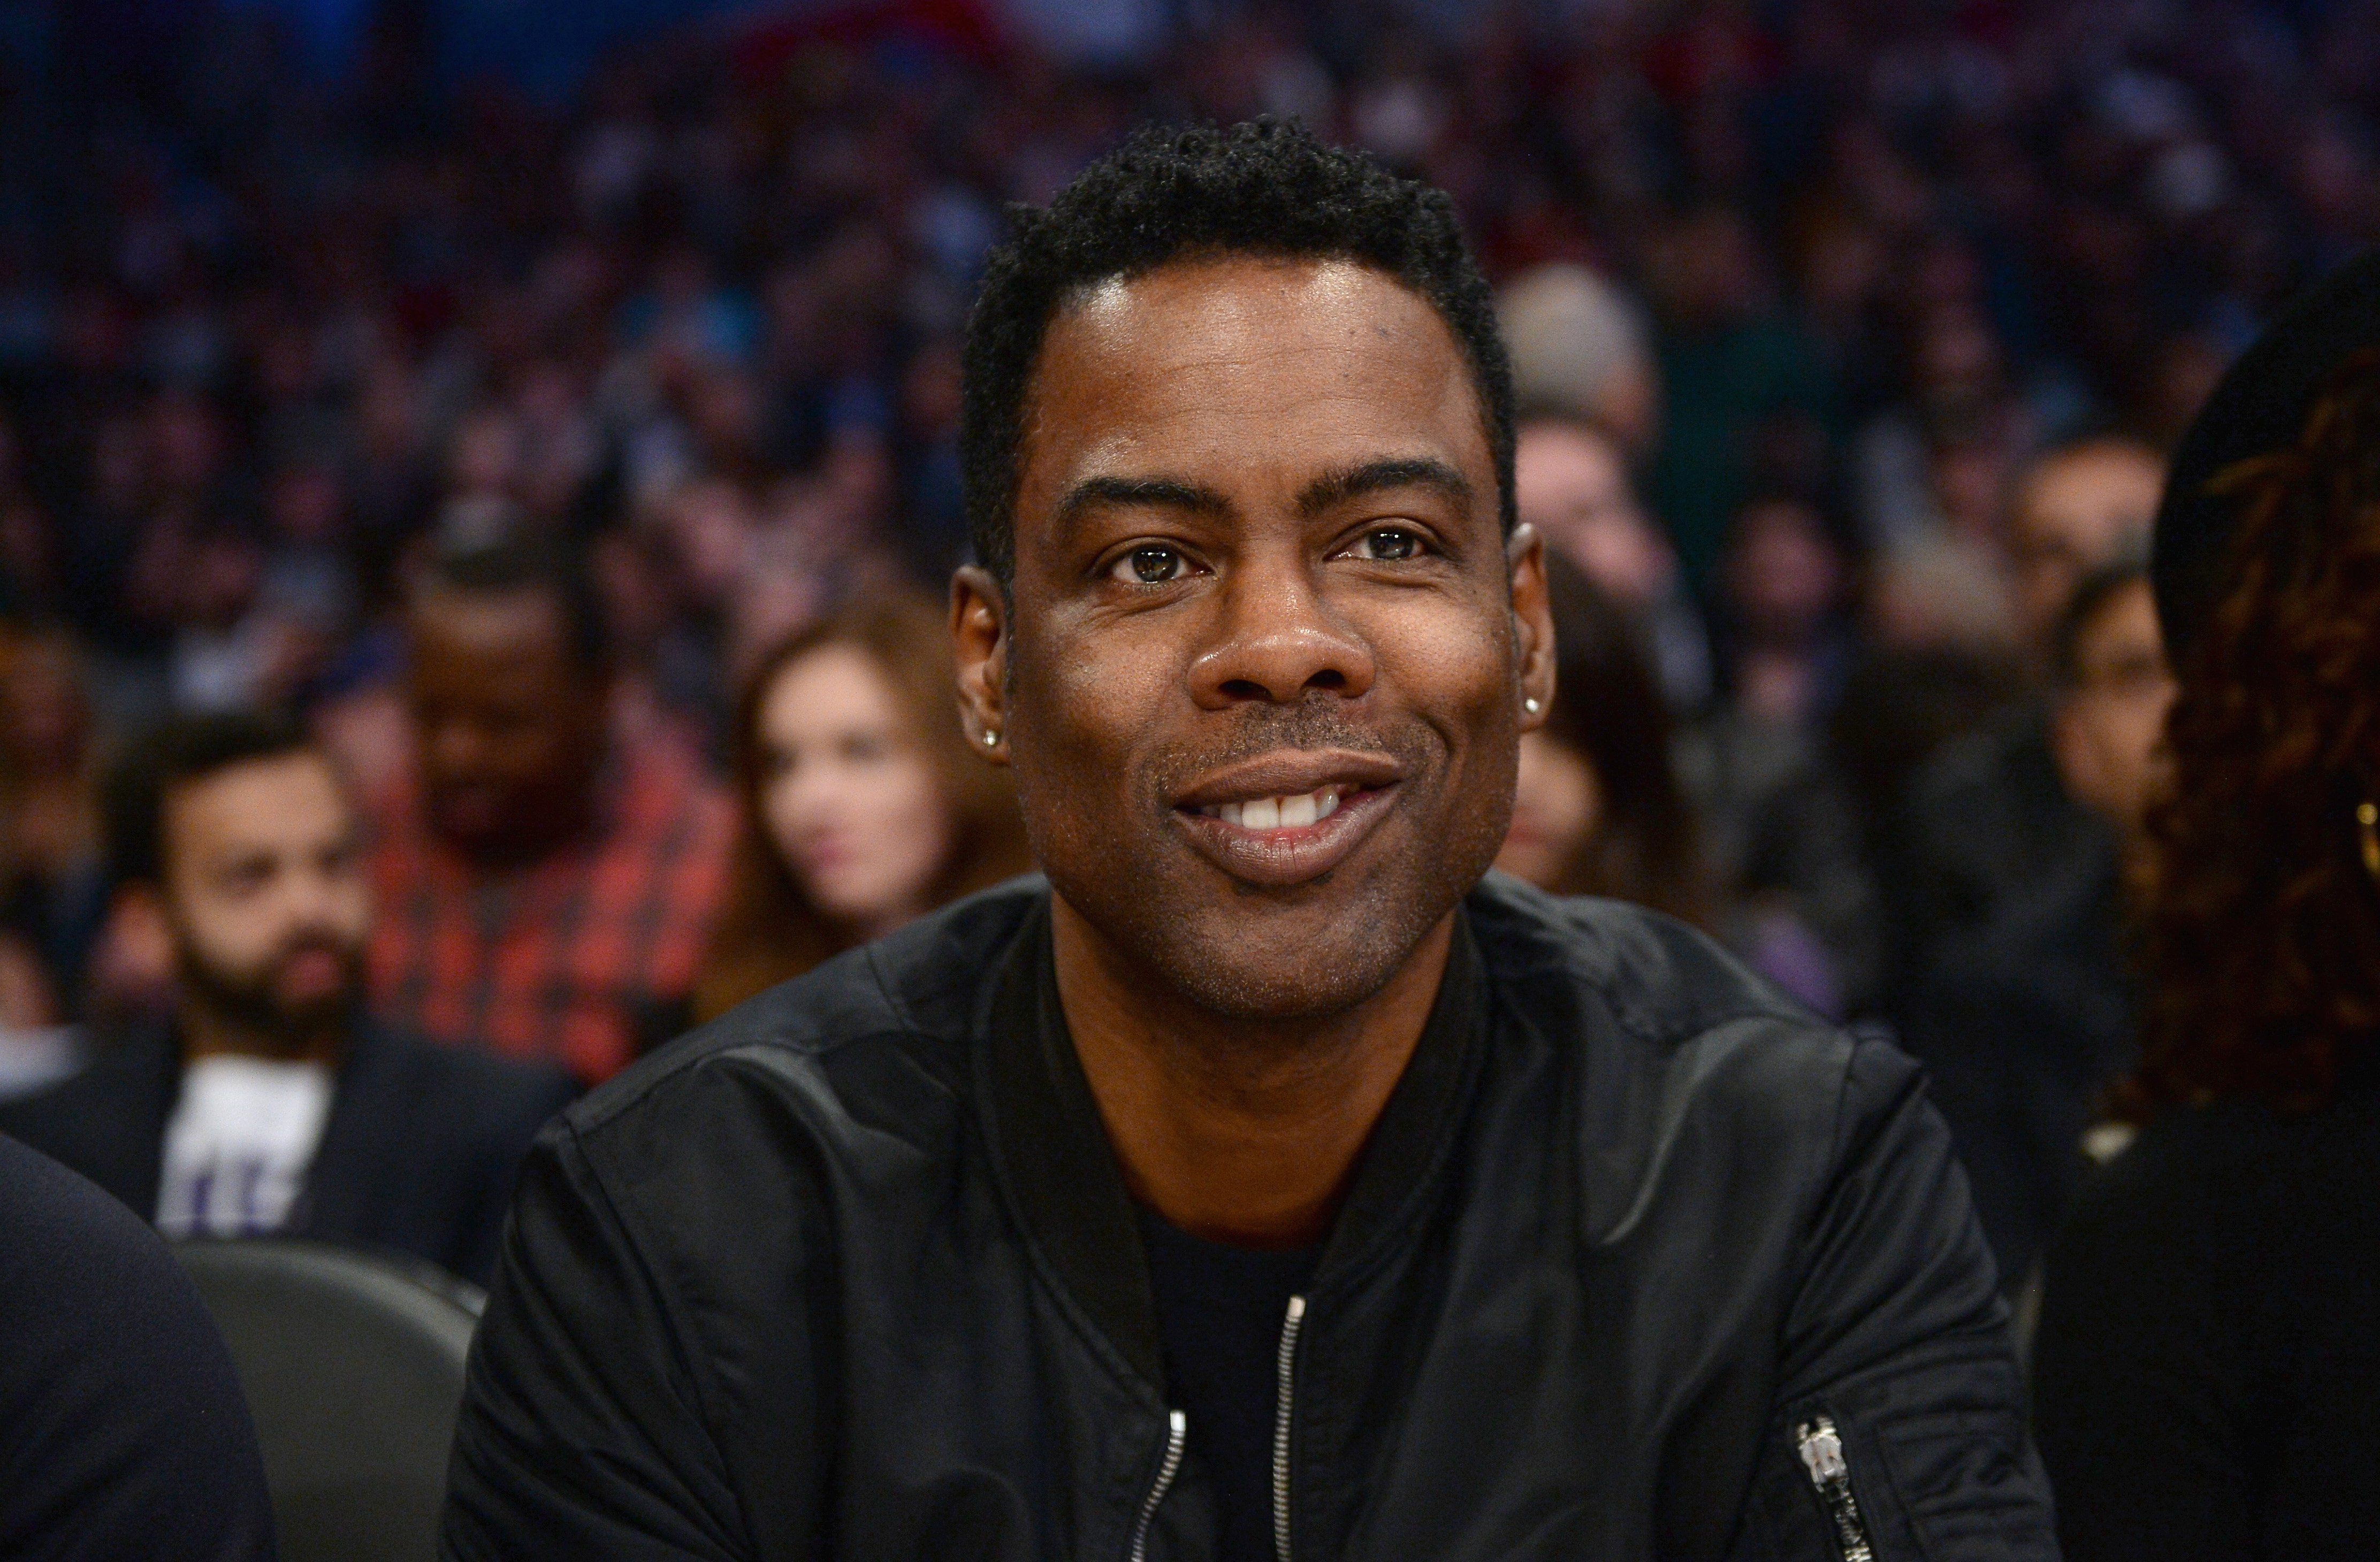 Chris Rock attends the NBA All-Star Game 2018 at Staples Center on February 18, 2018 in Los Angeles, California. | Source: Getty Images 